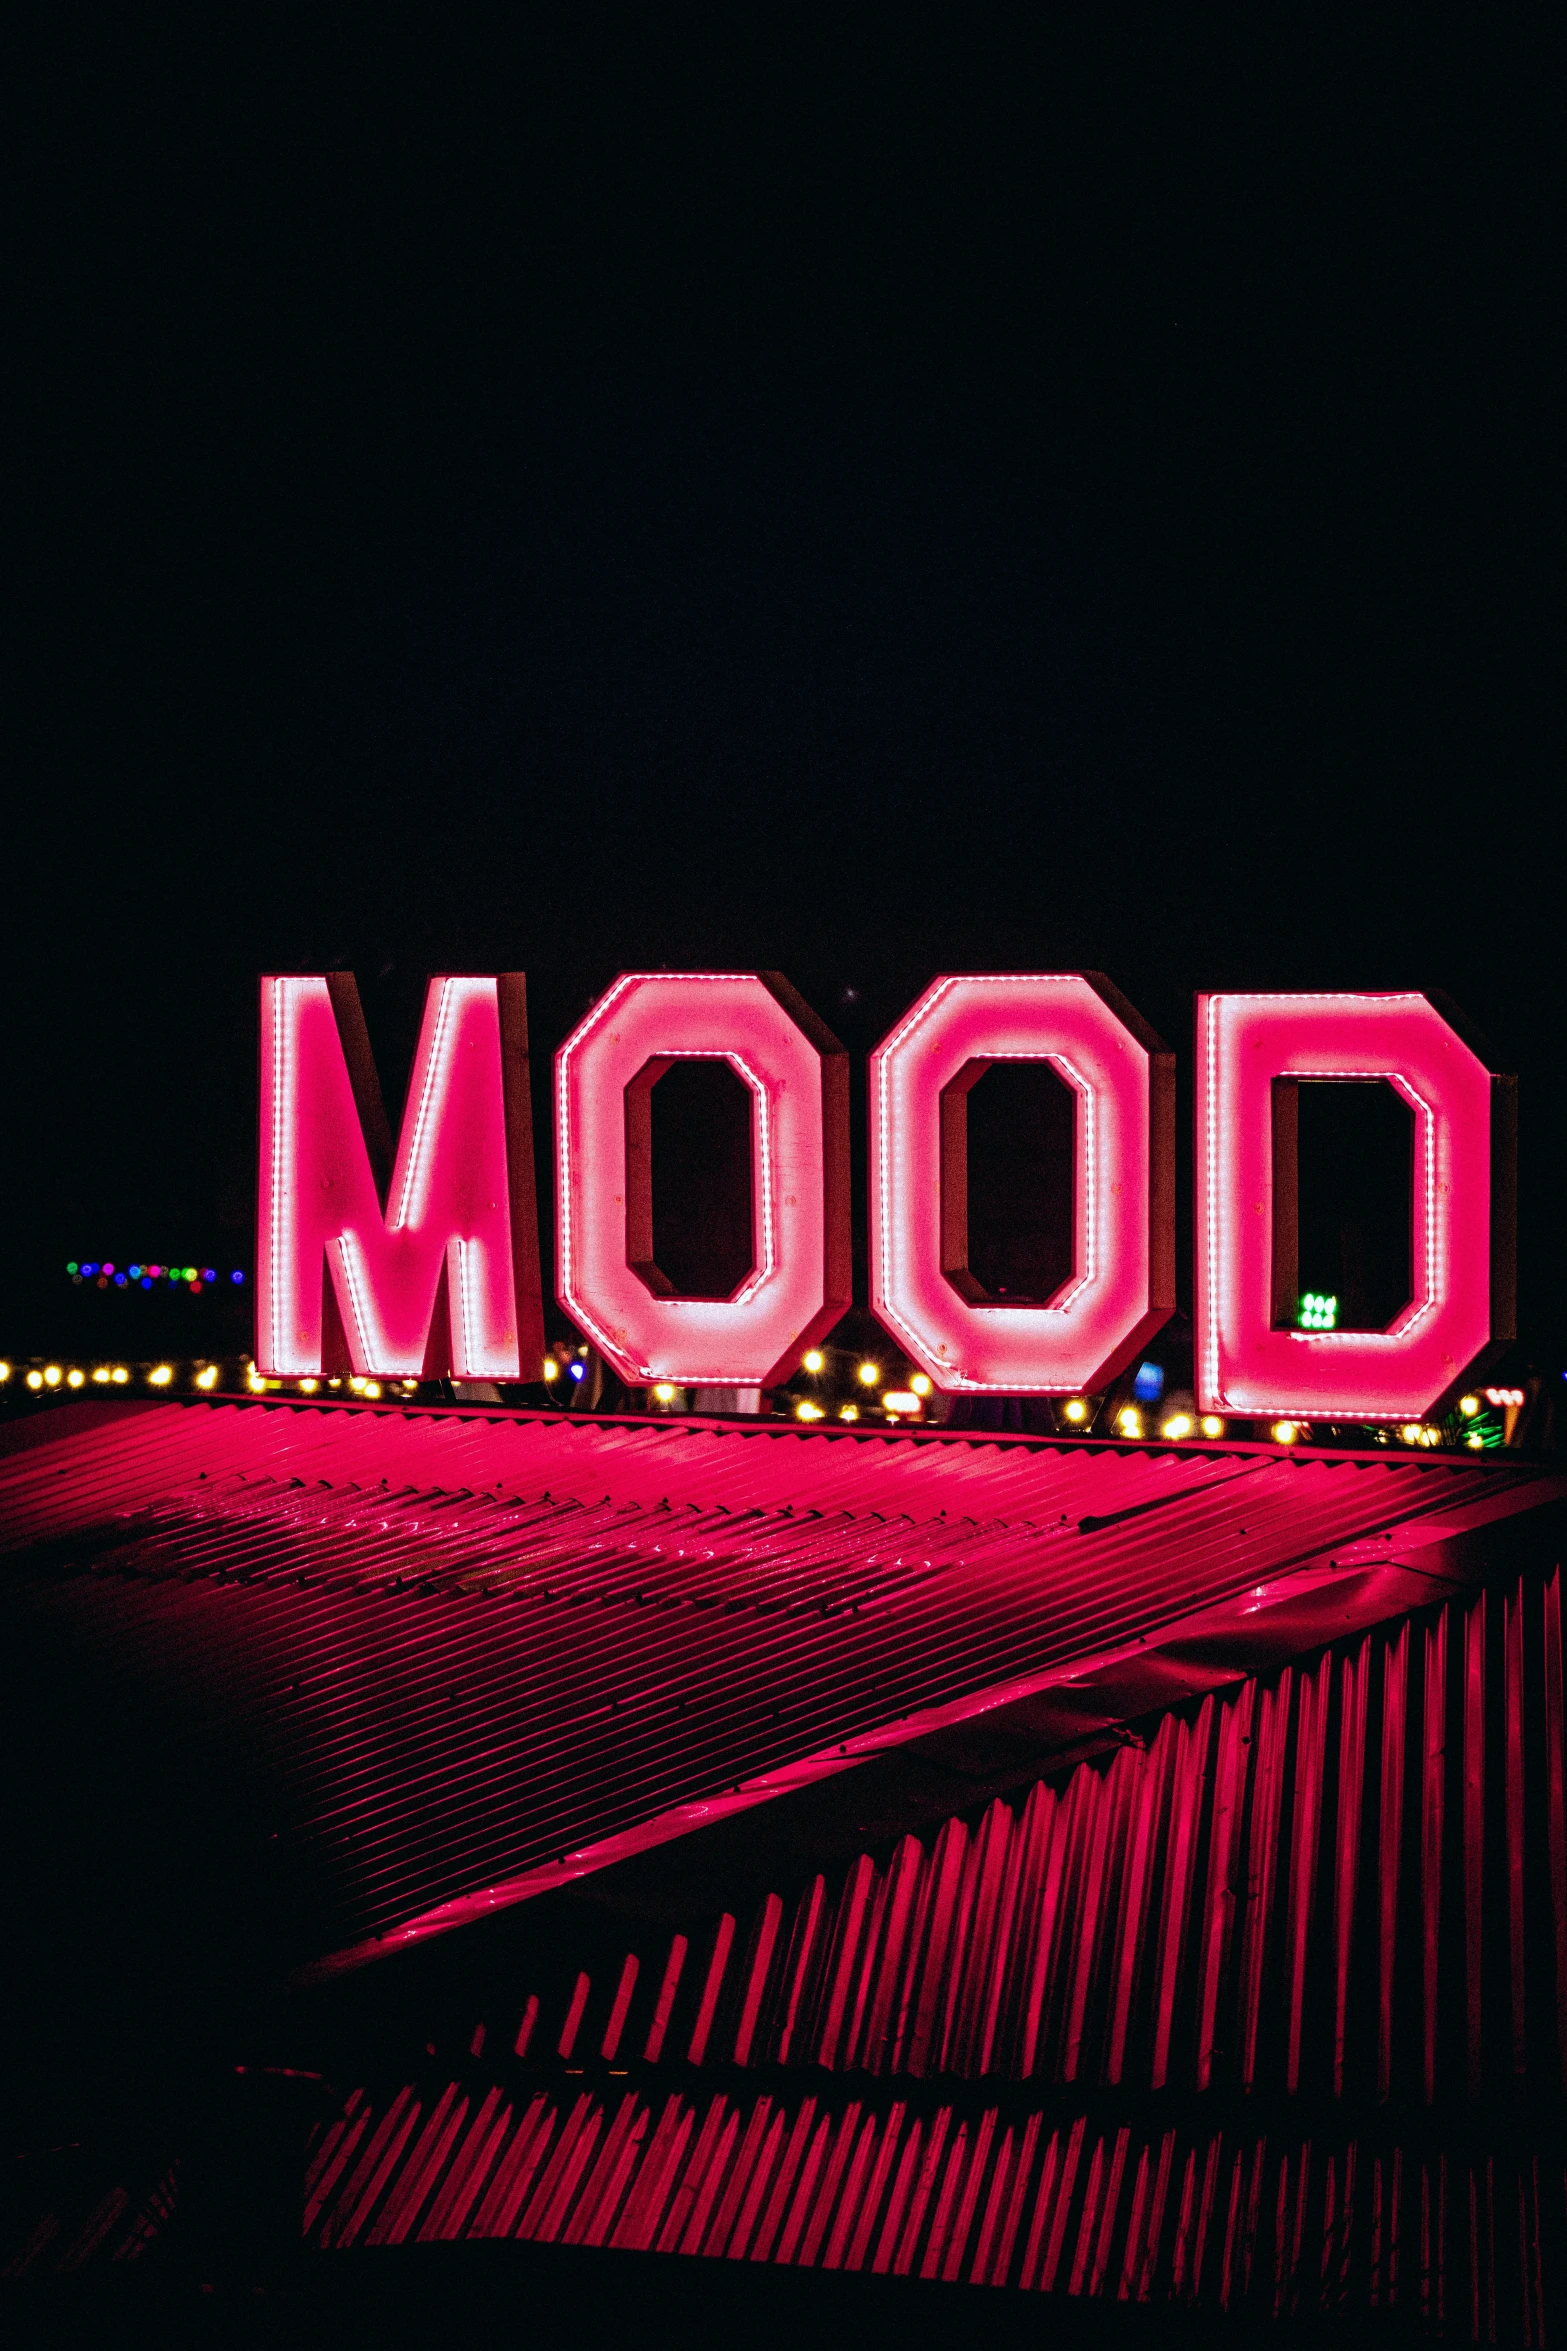 an image of a red word made out of neon lights